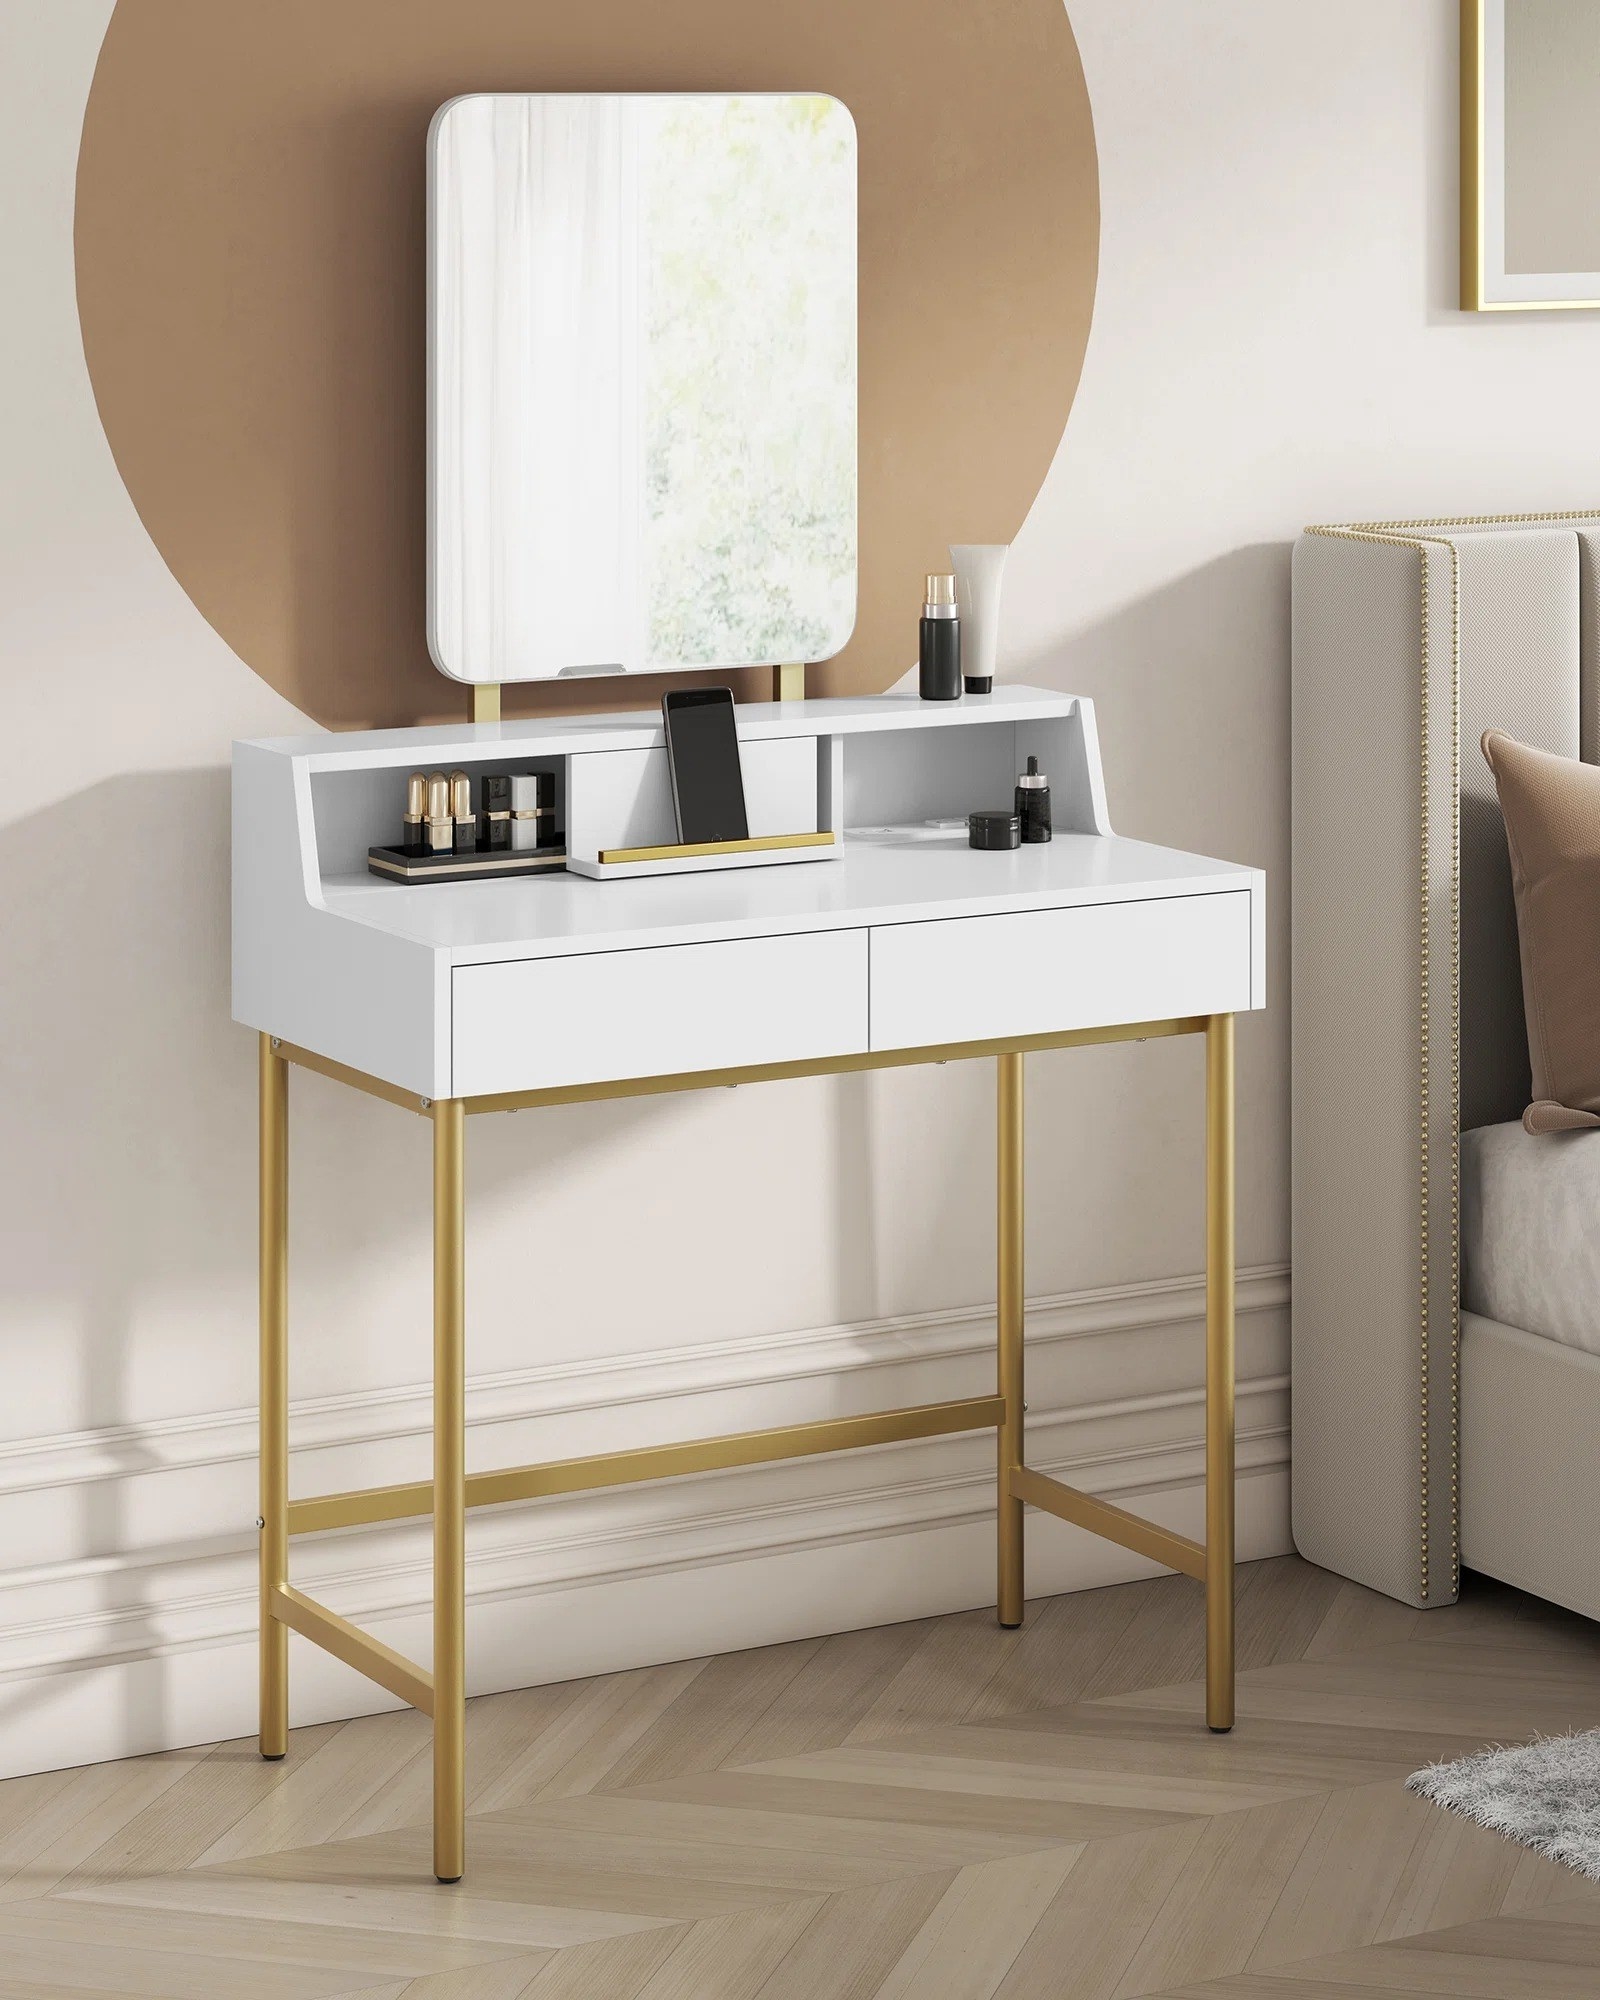 the white and gold vanity